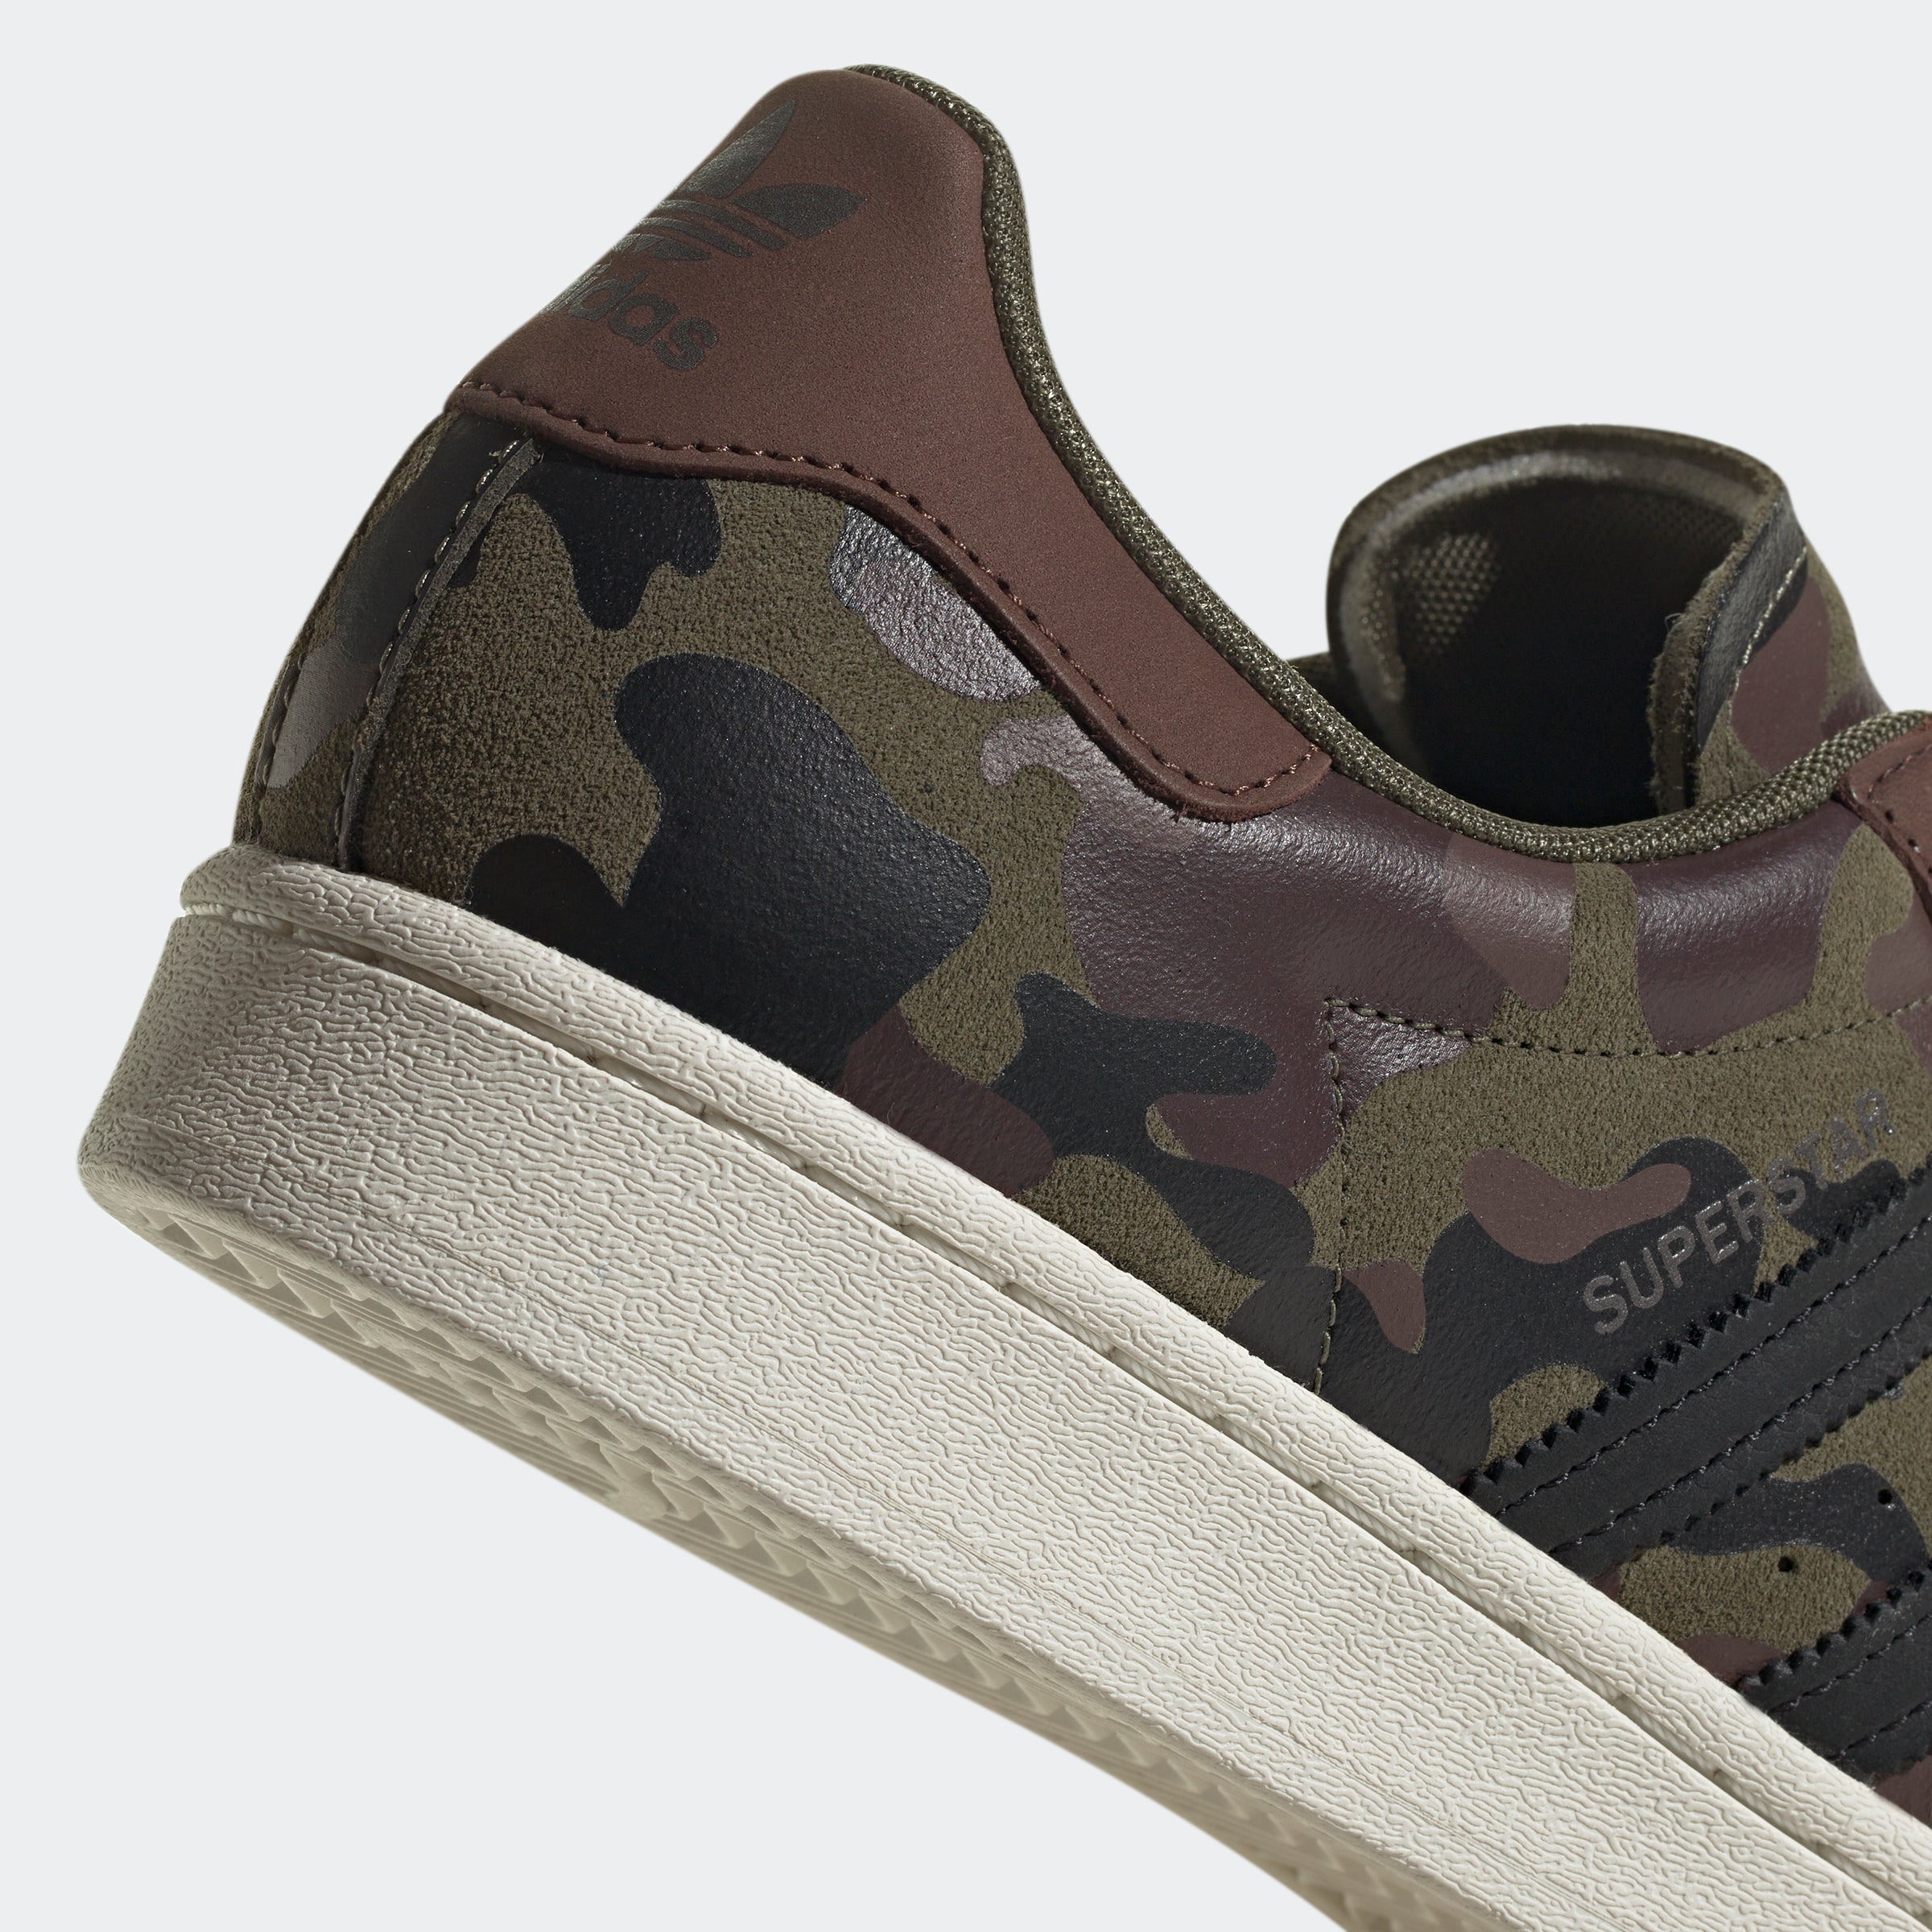 adidas Superstar Shoes Olive Strata Camouflage | City Sports